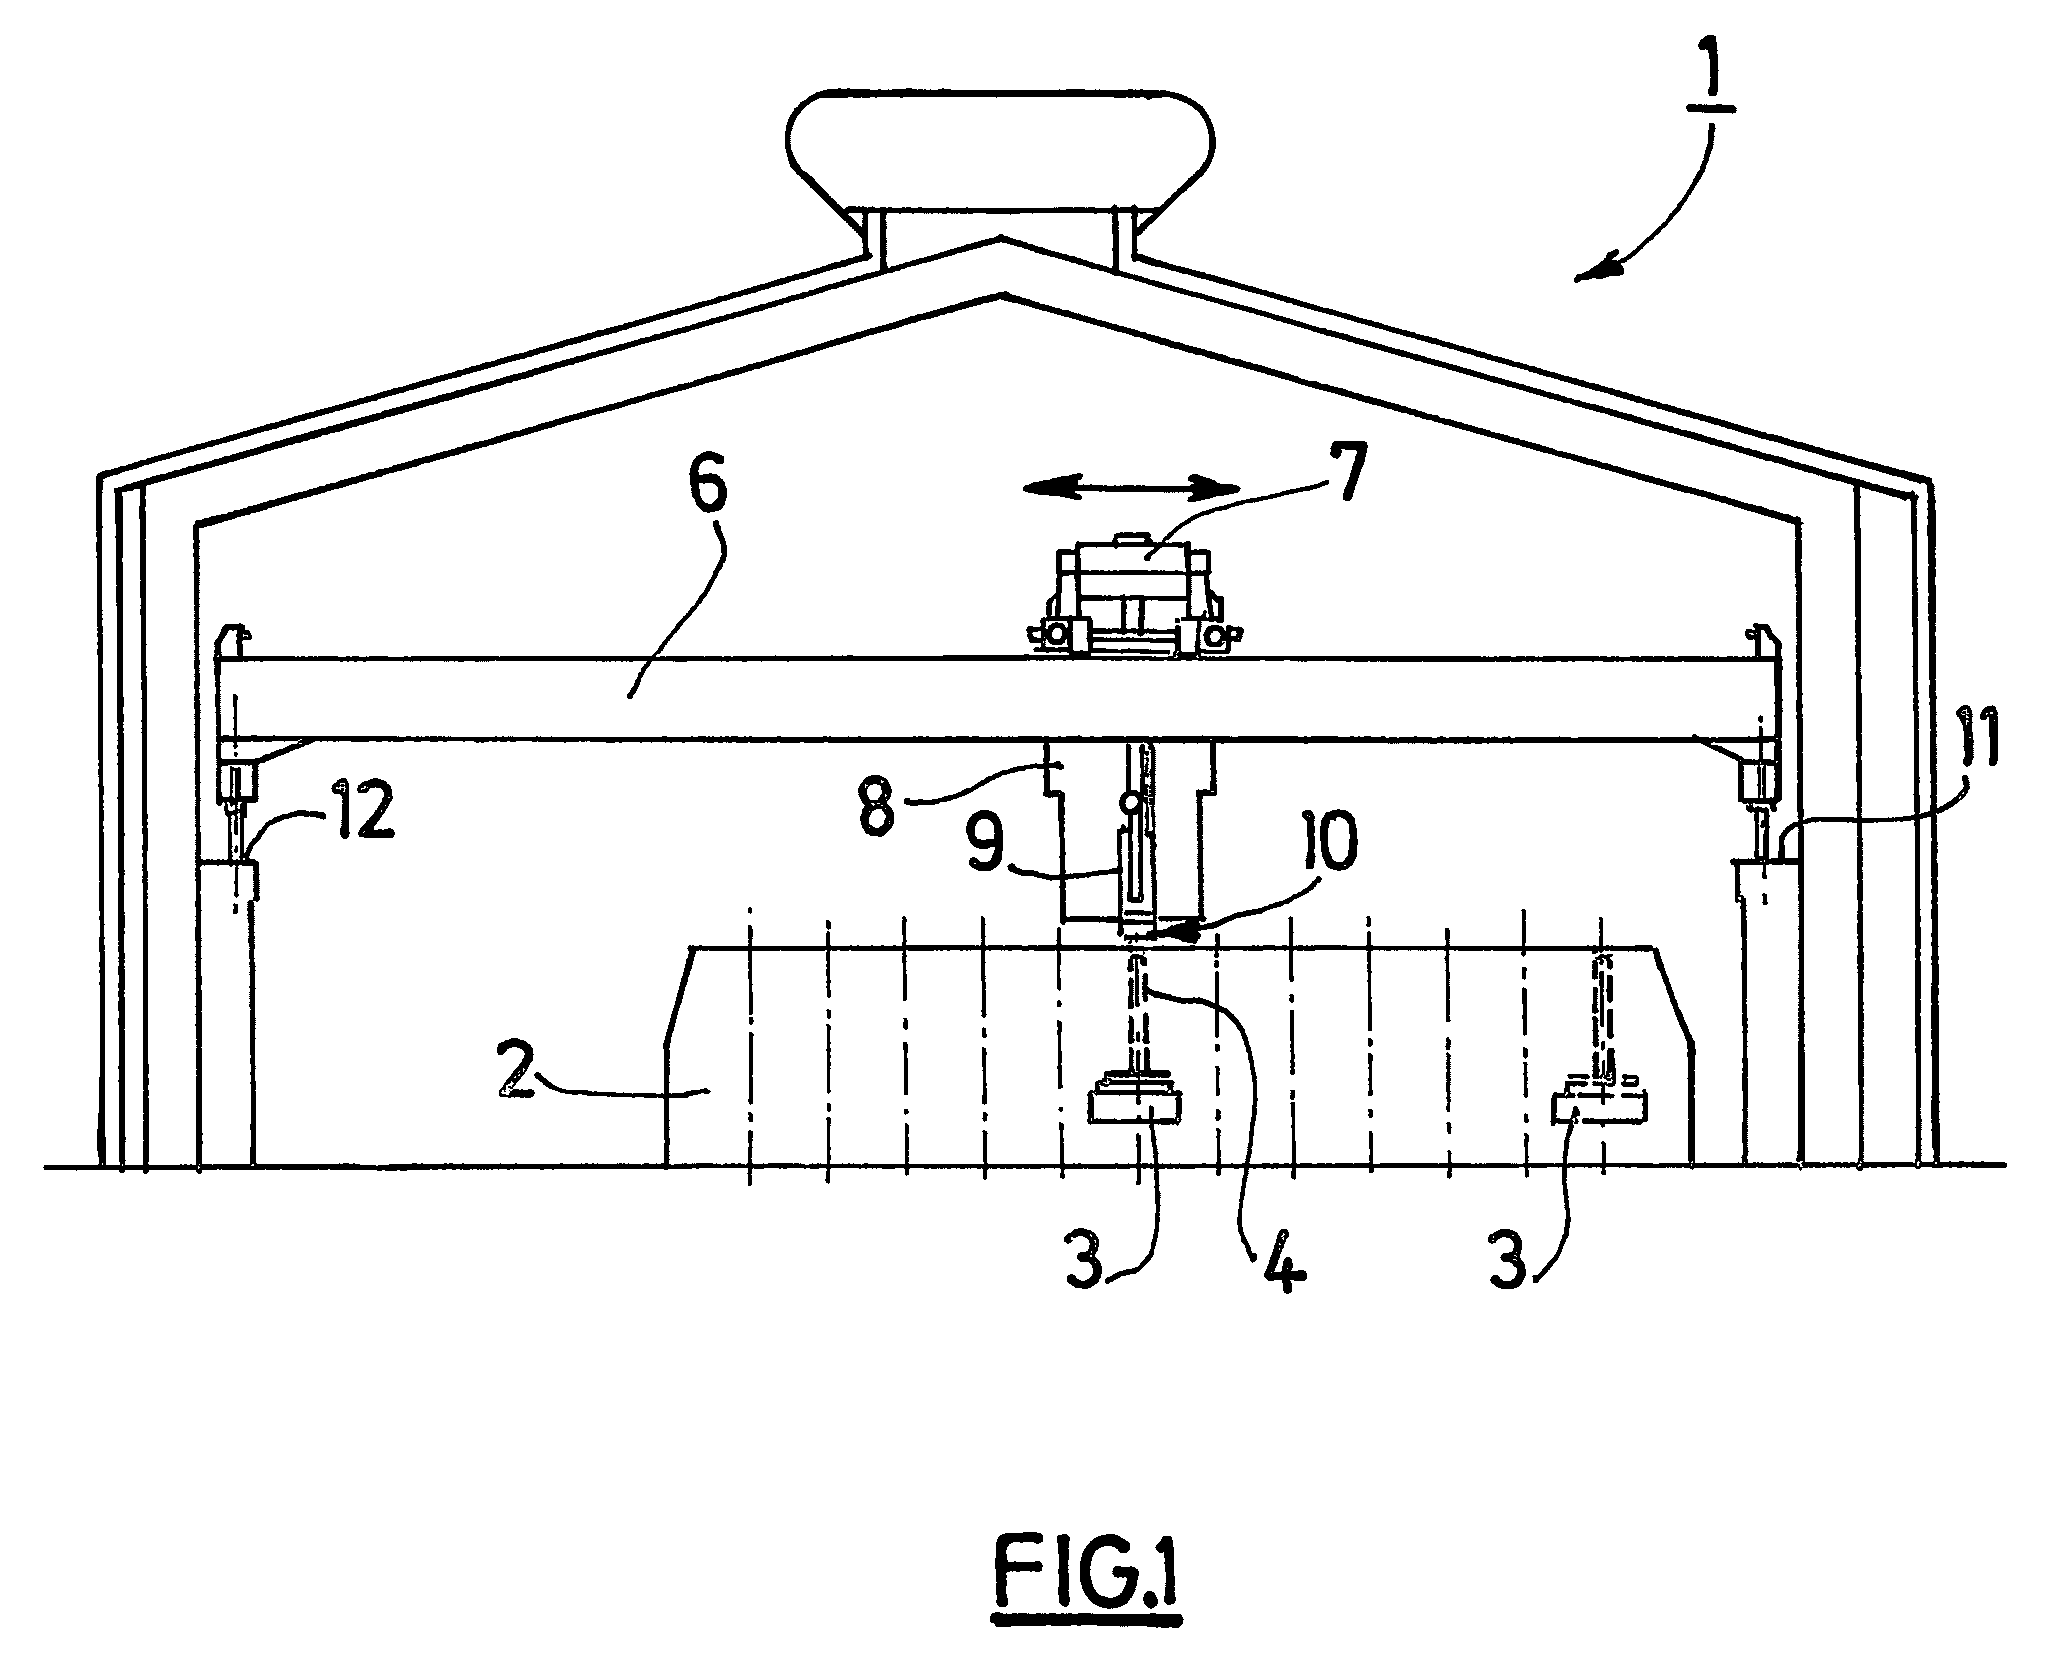 Handling clamp for a machine designed for tending an electrolytic cell used for the production of aluminium